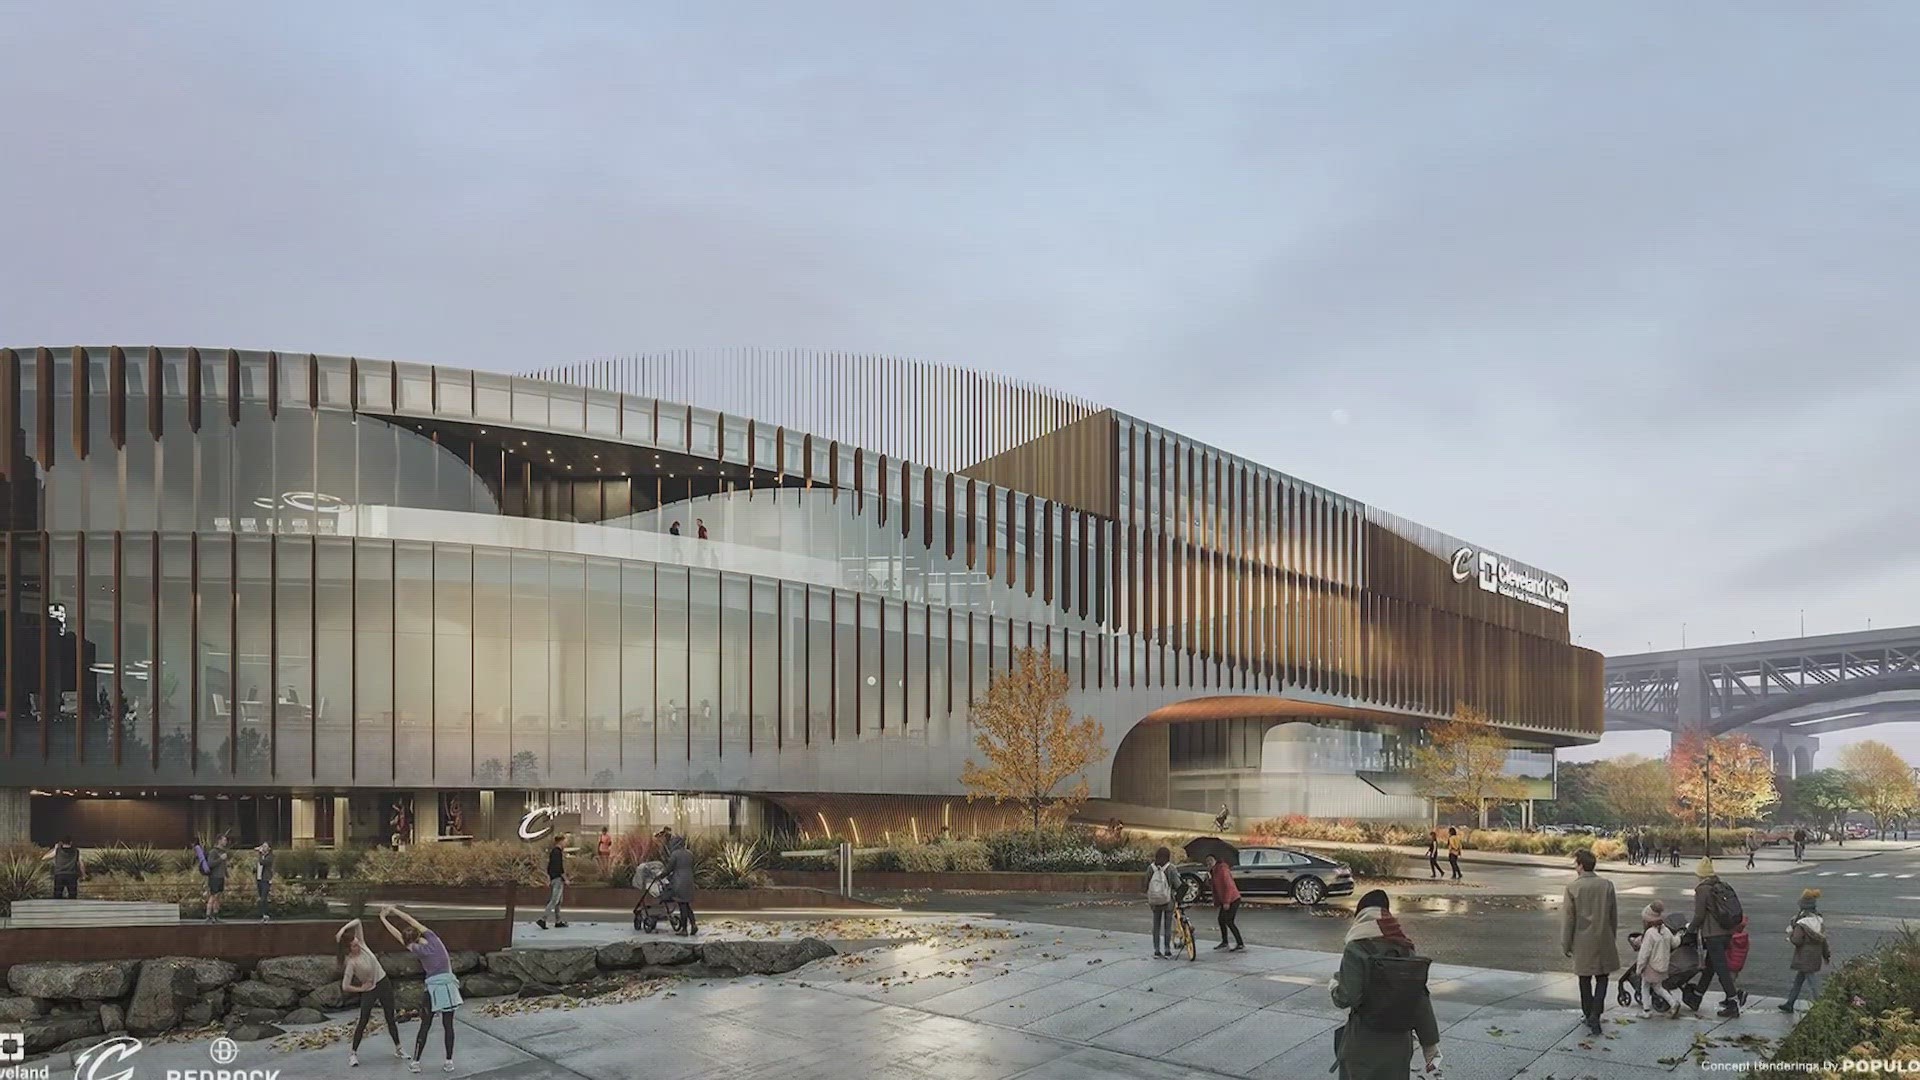 Planners say groundbreaking on the Cleveland Clinic Global Peak Performance Center could take place by the end of this year, pending approval.